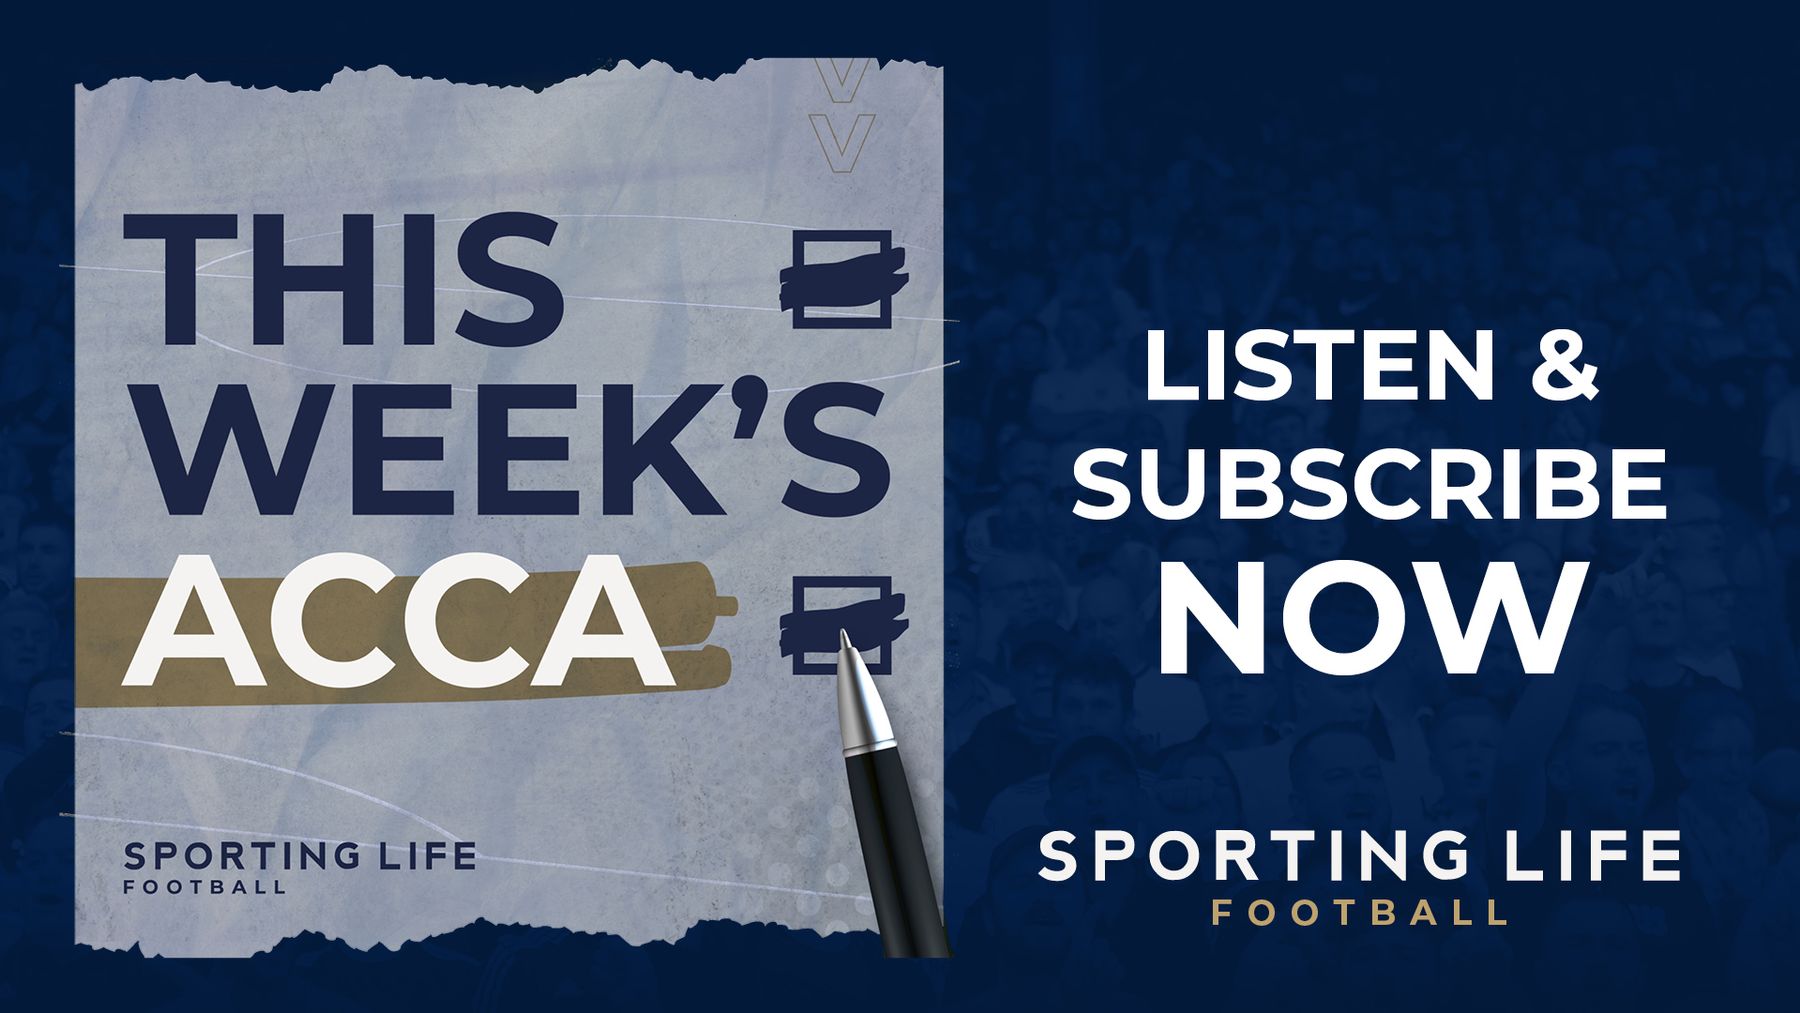 This Weeks Acca Podcast from Sporting Life